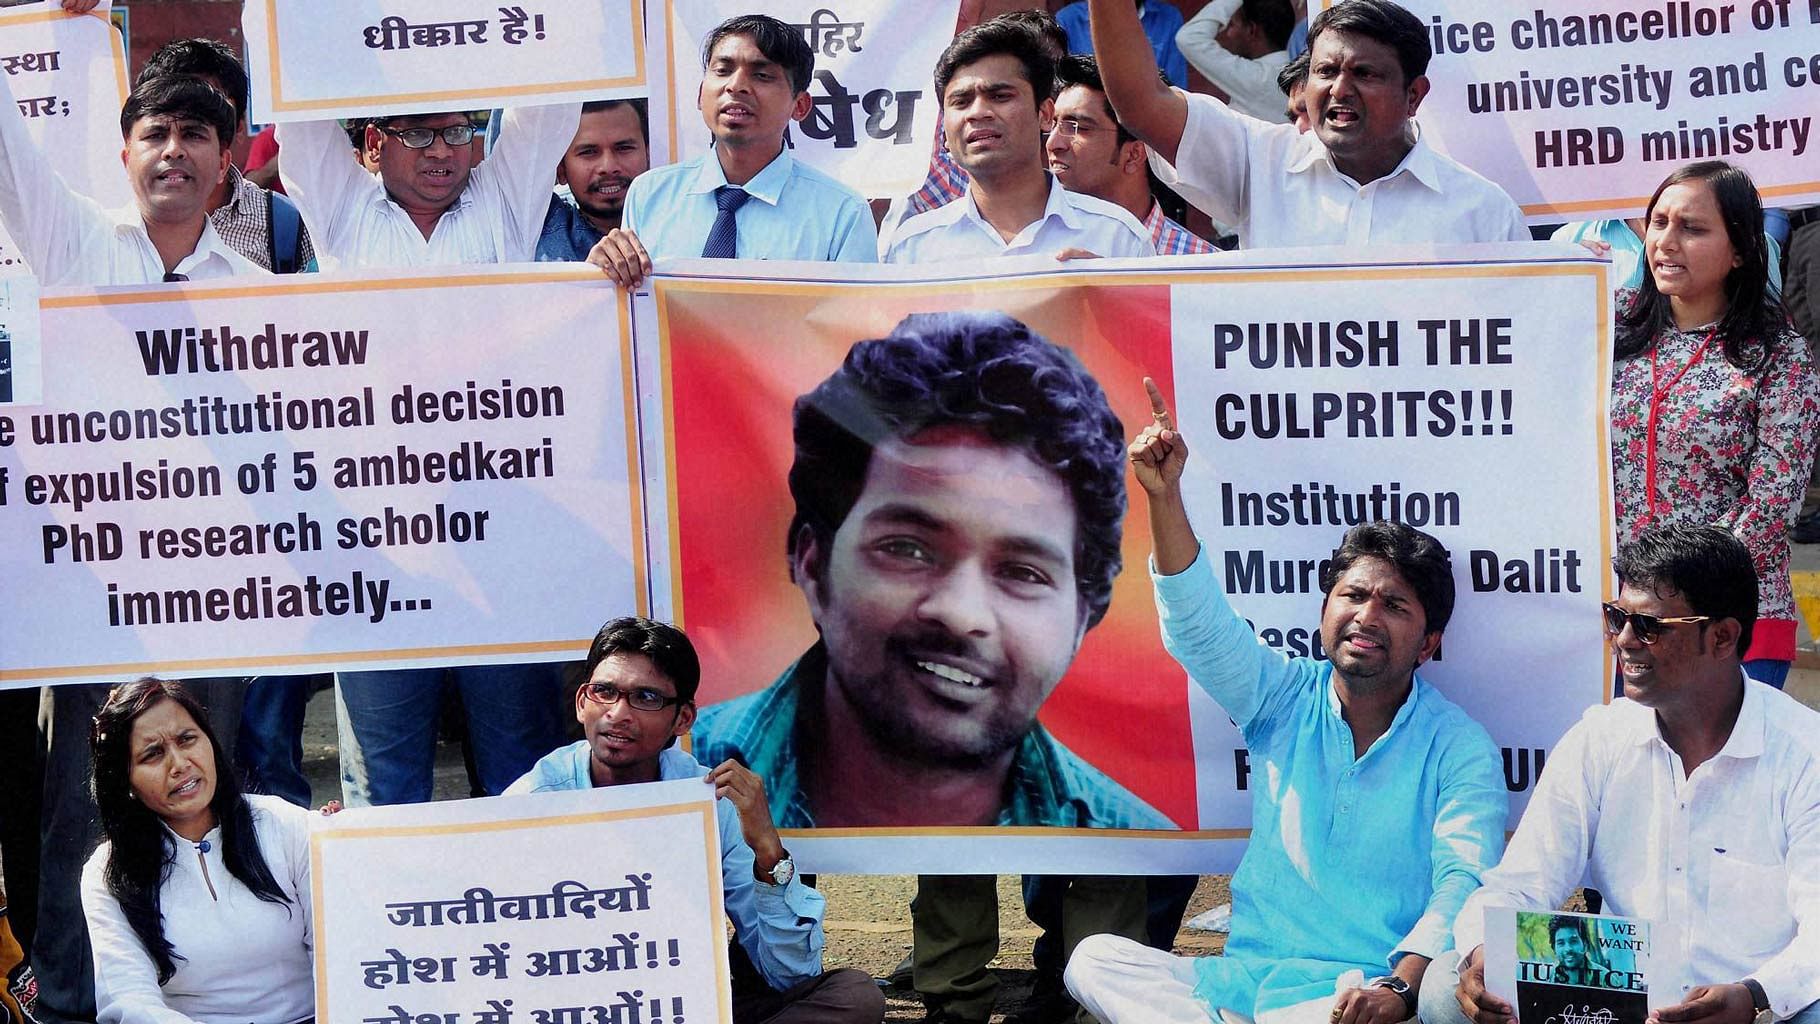 Rohith Vemula, a research scholar at the University of Hyderabad, committed suicide in January 2016. (Photo: PTI)